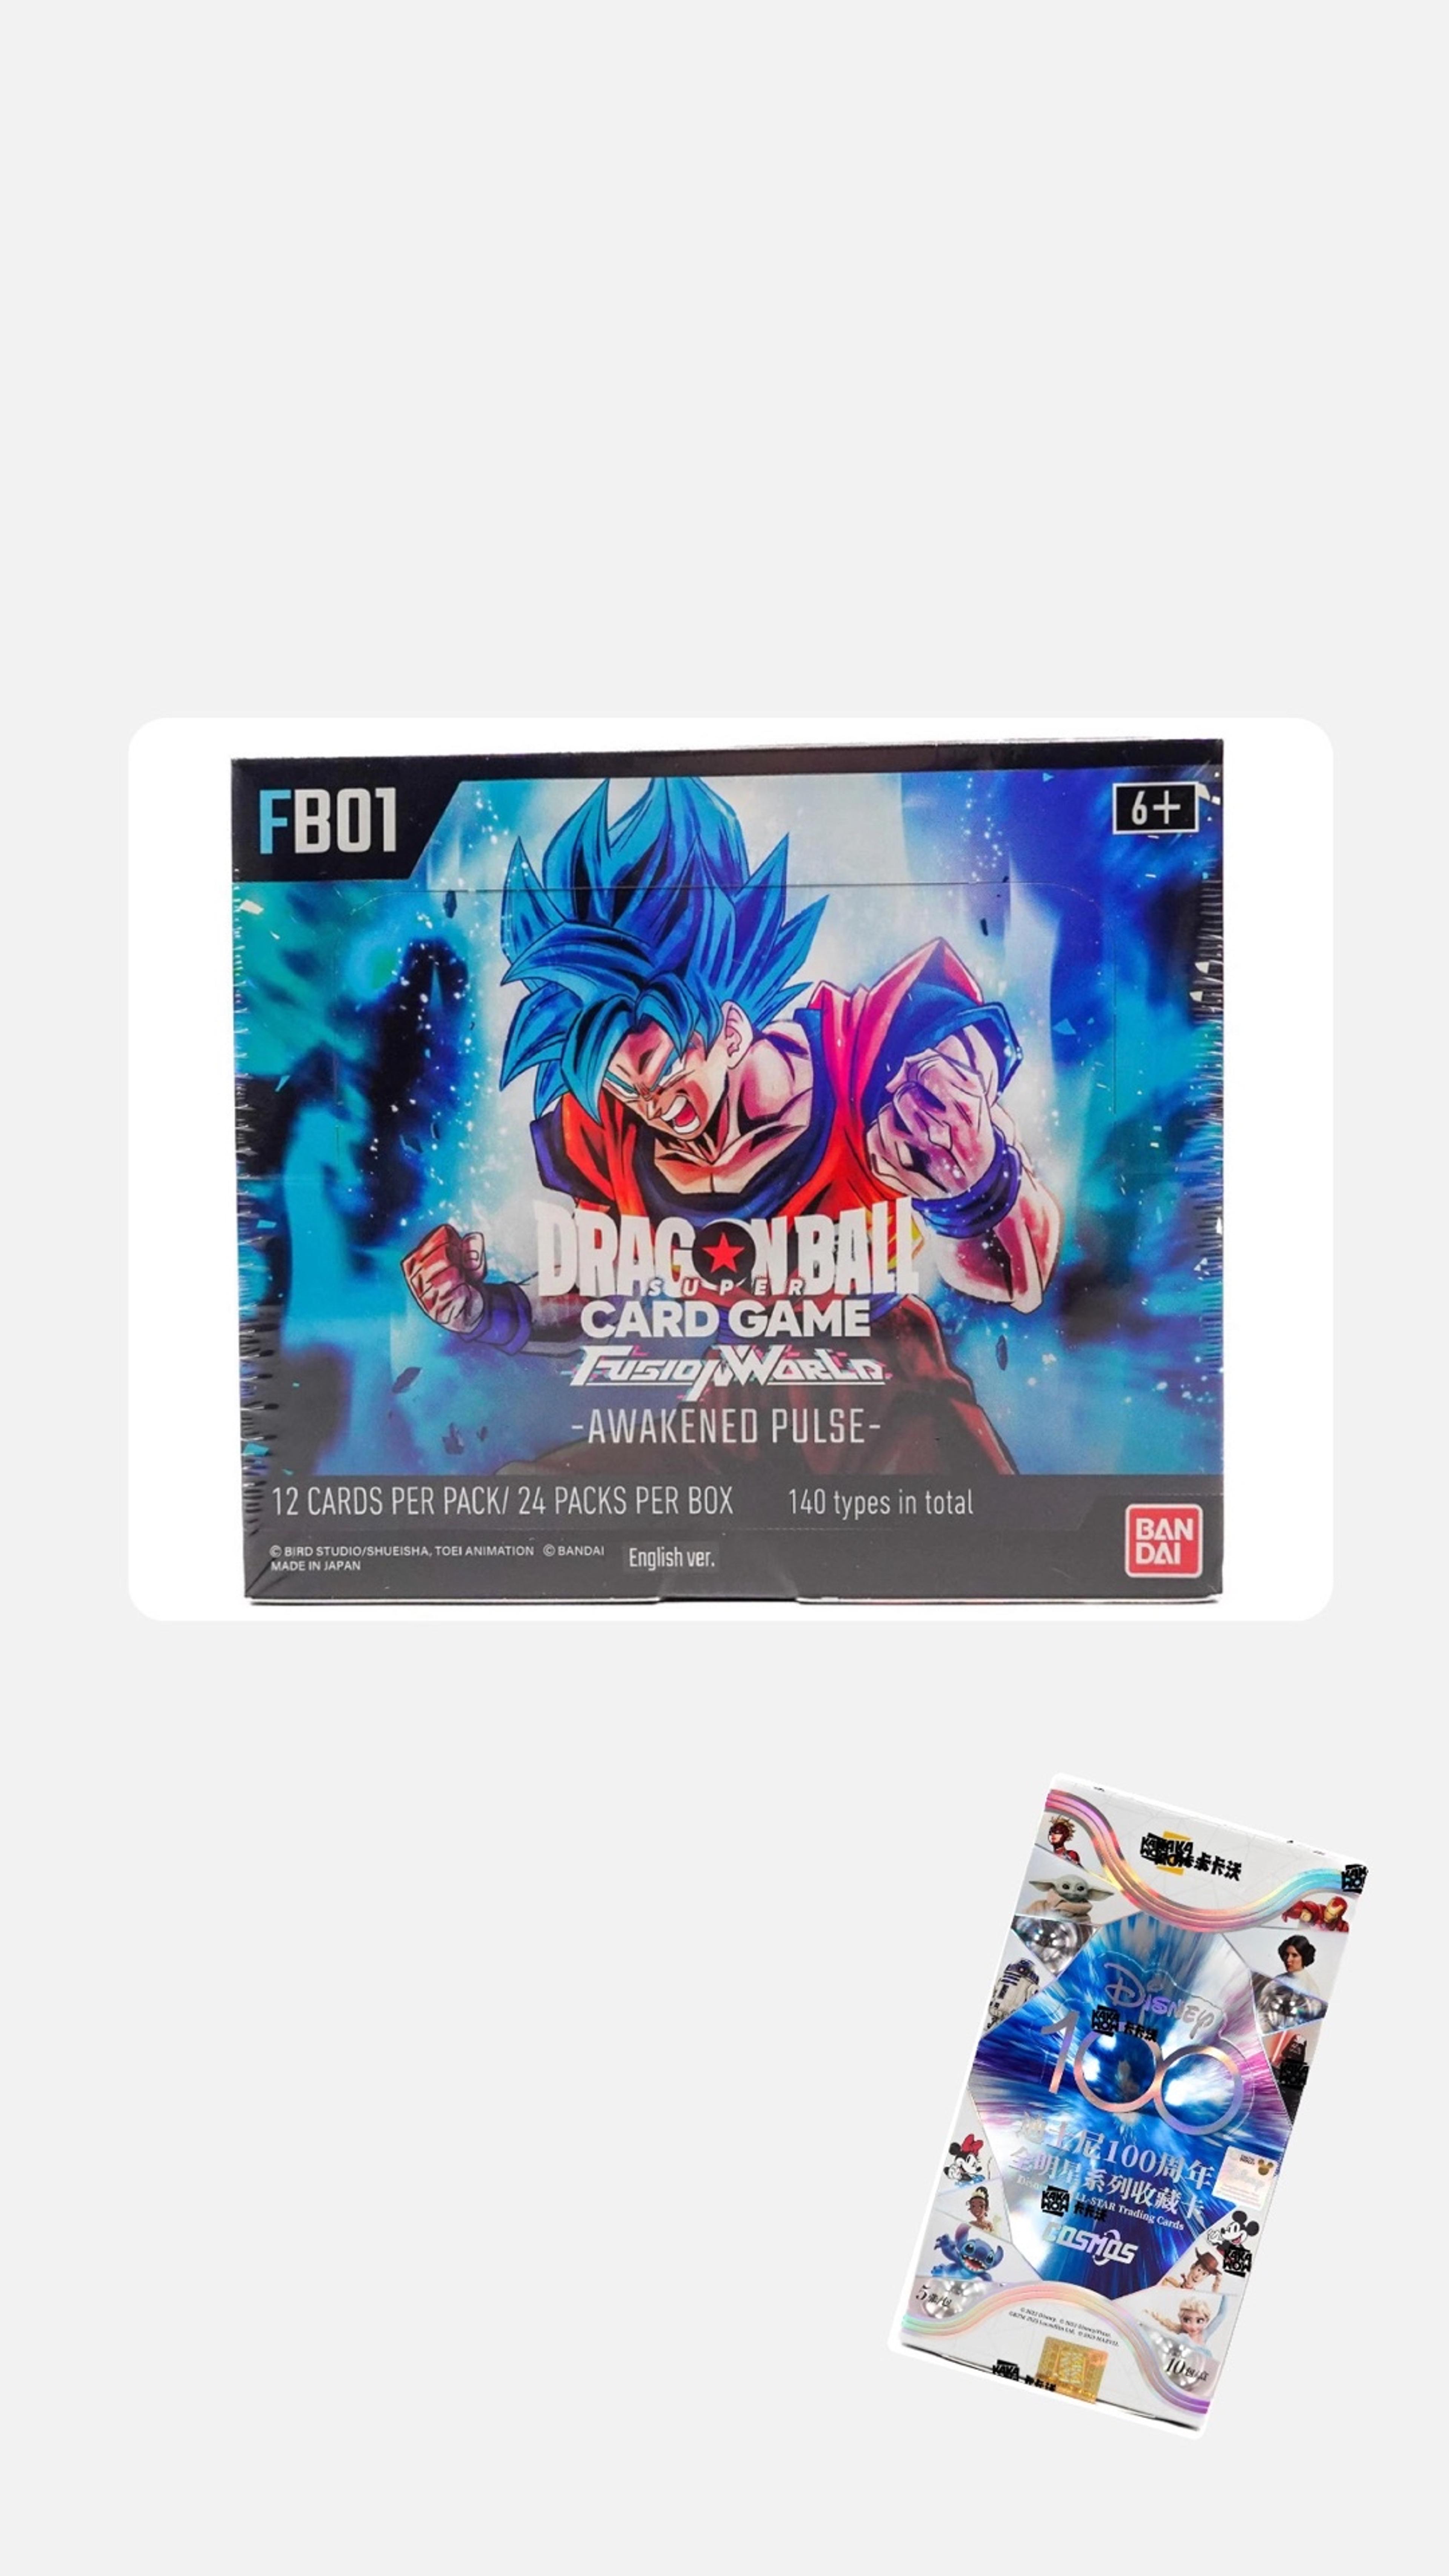 Preview image for the show titled "Craftii: RESTOCK ON DBZ FUSION WORLD! DISNEY COSMO & MORE!" at Today @ 3:59 AM